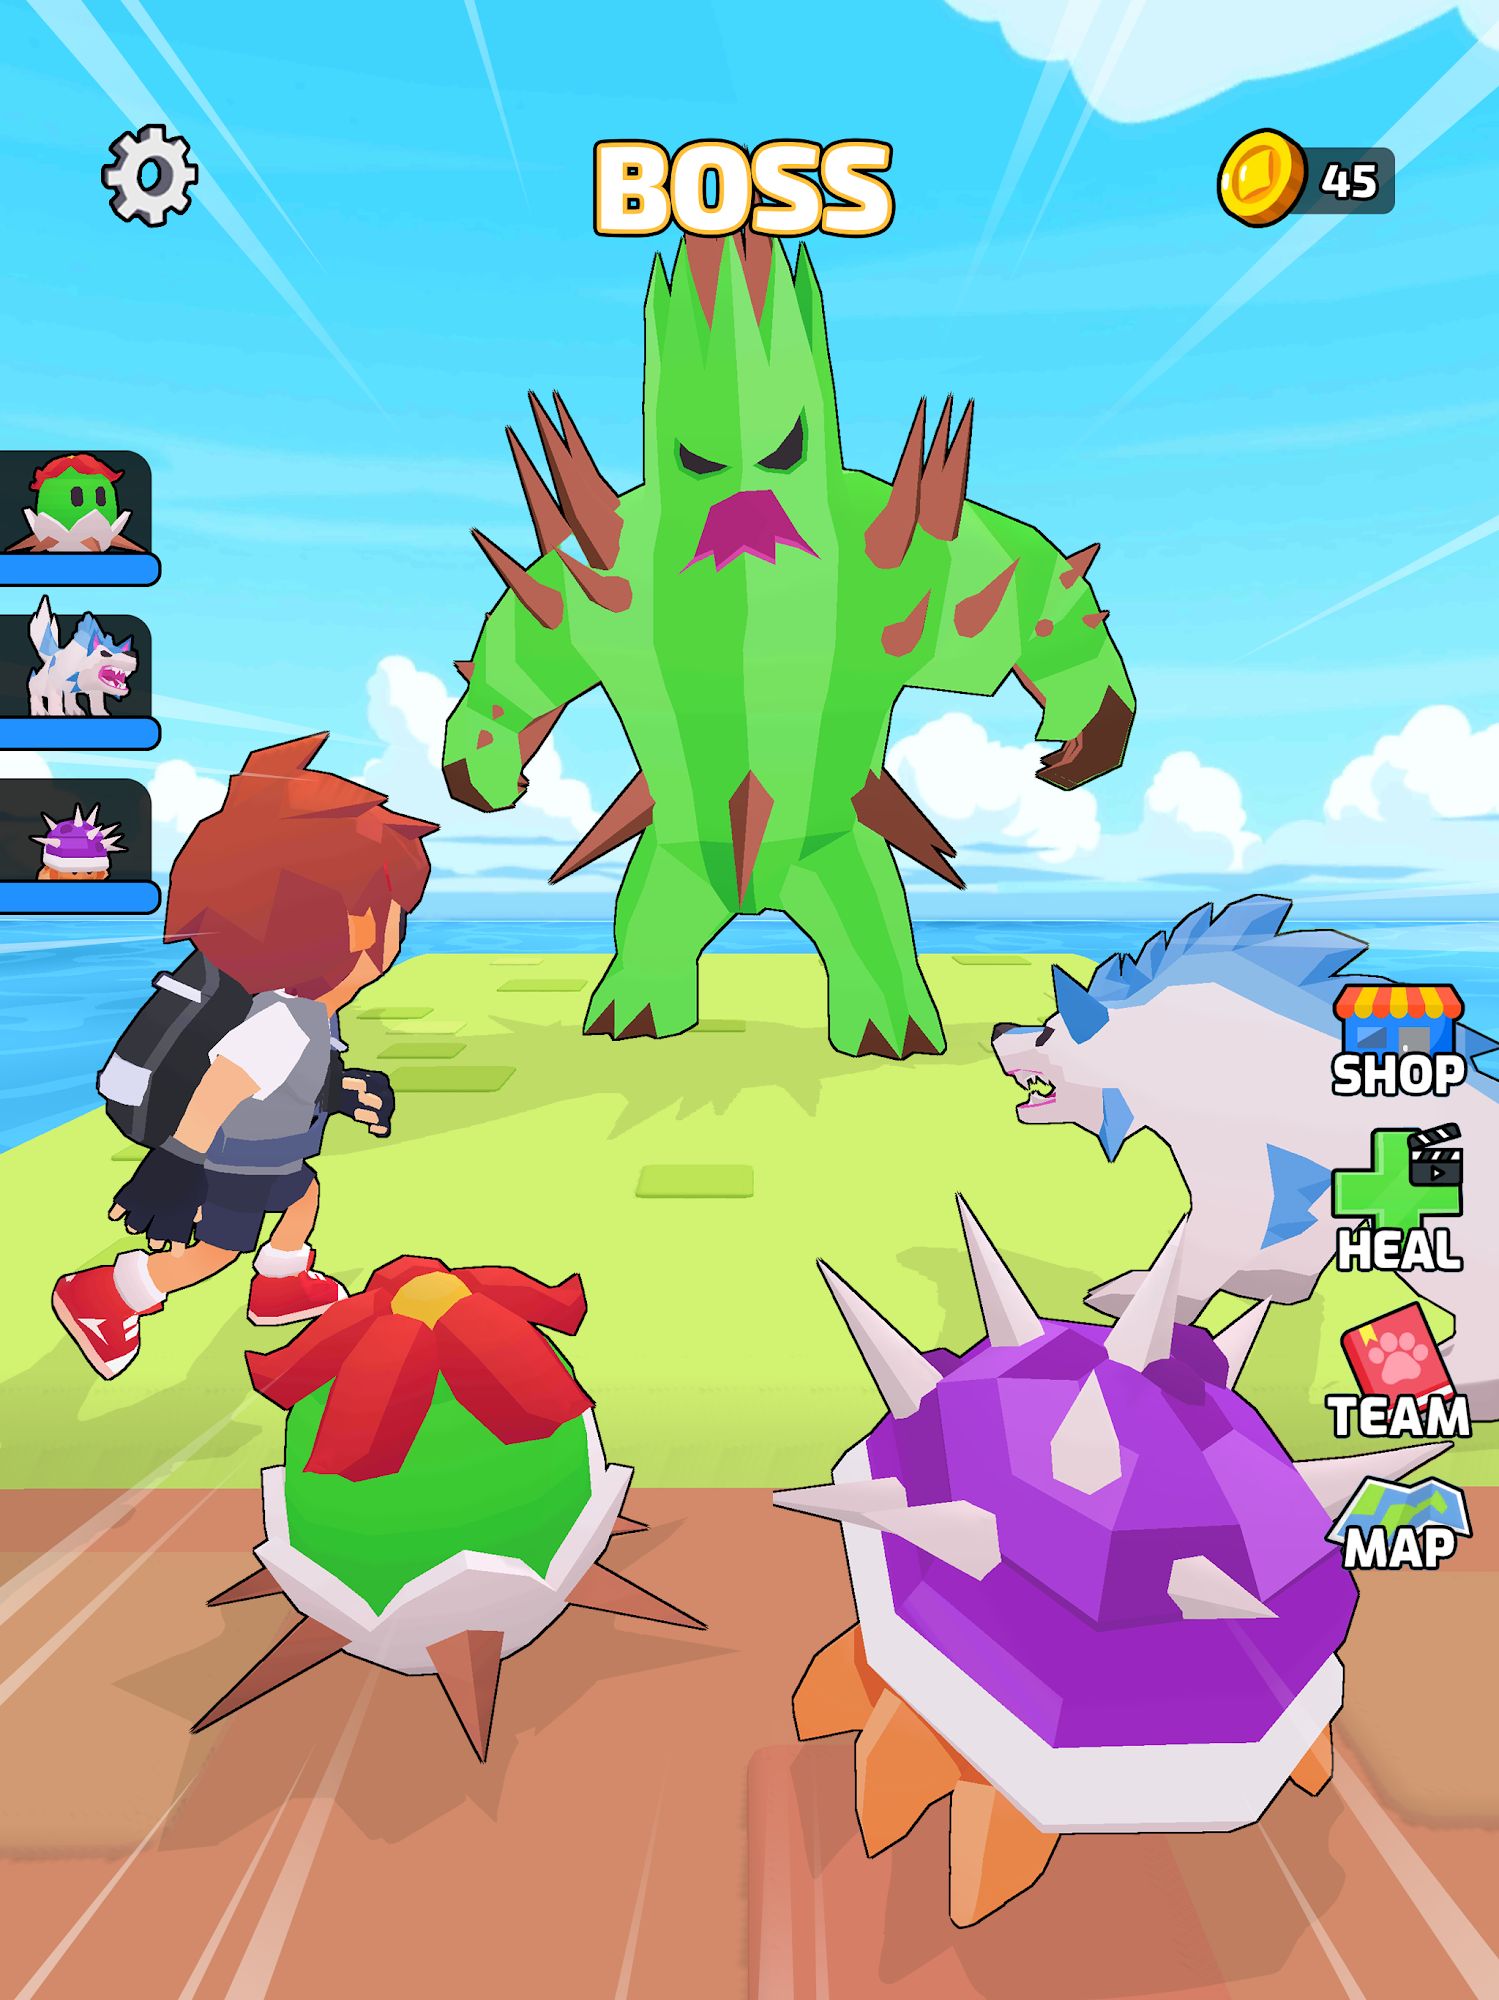 Gameplay of the Metamon Island for Android phone or tablet.